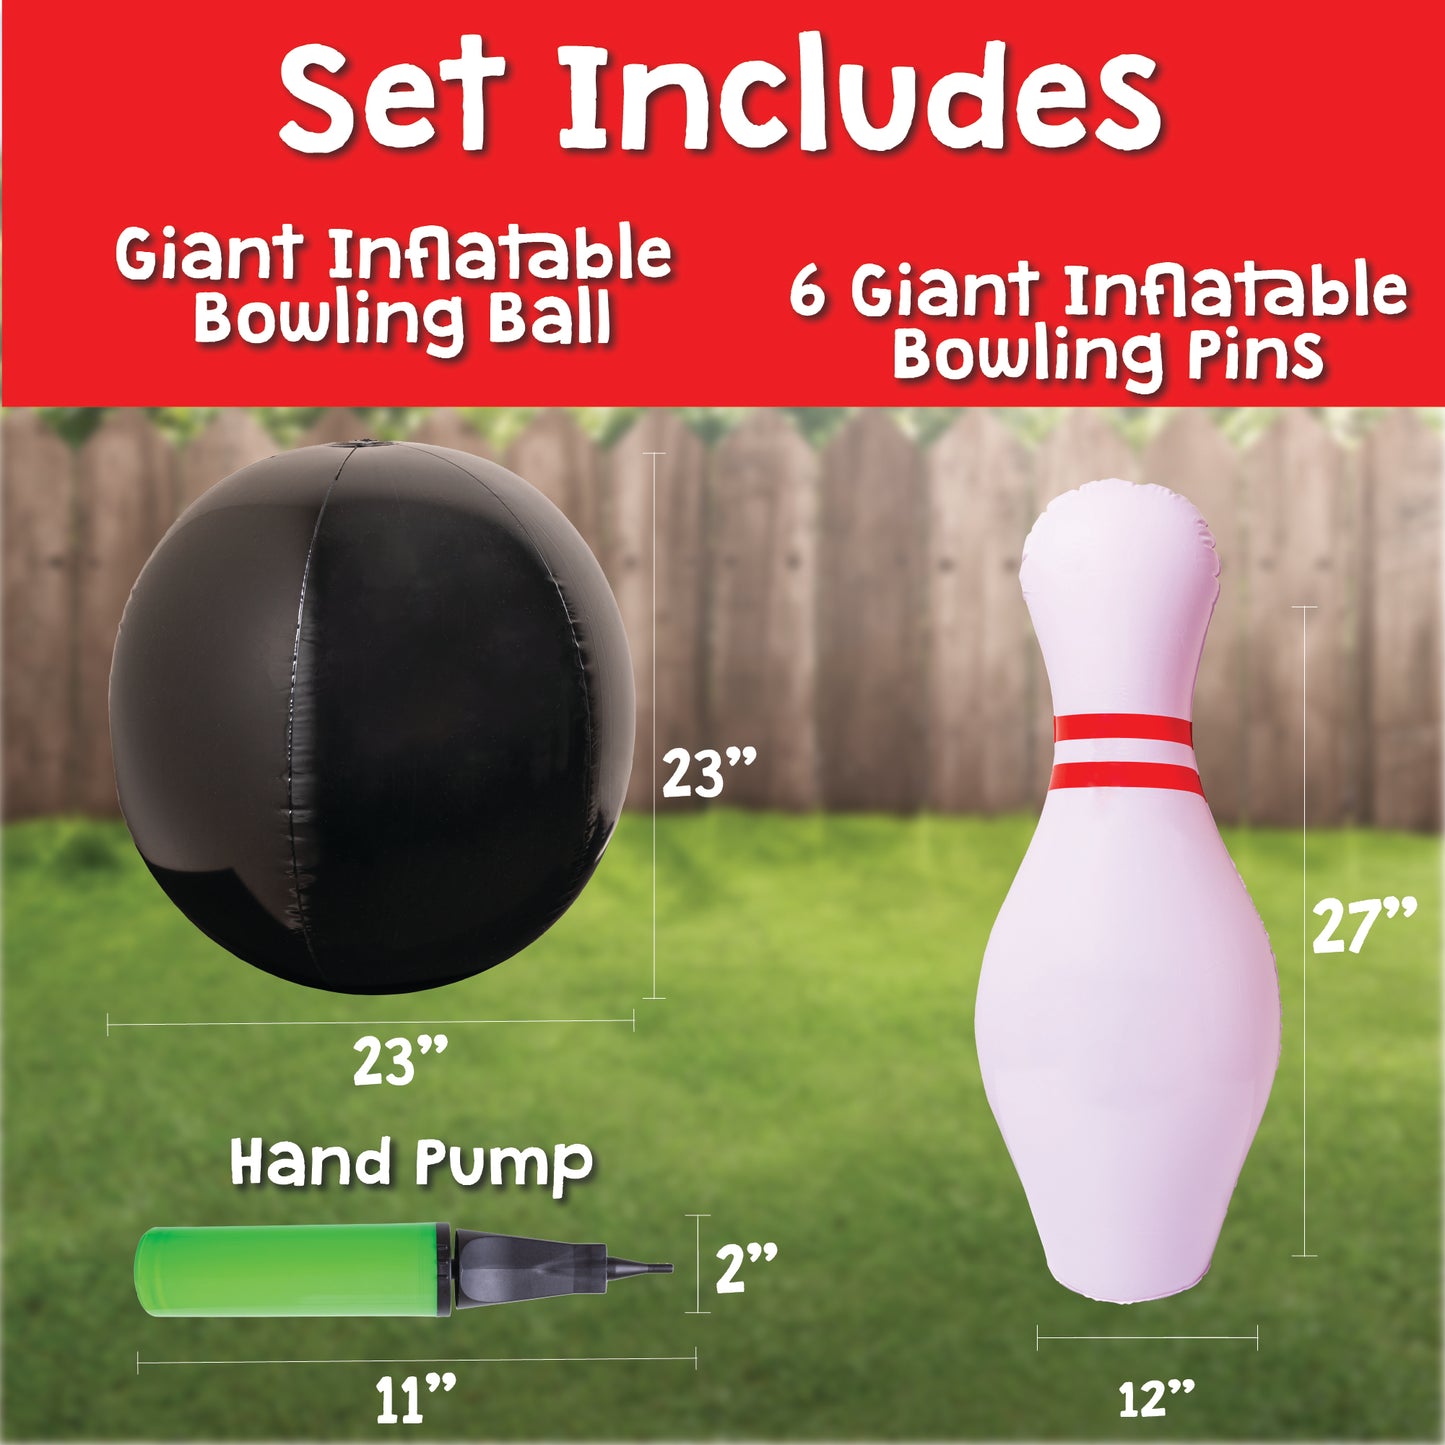 Giant Inflatable Bowling Ball & Pins